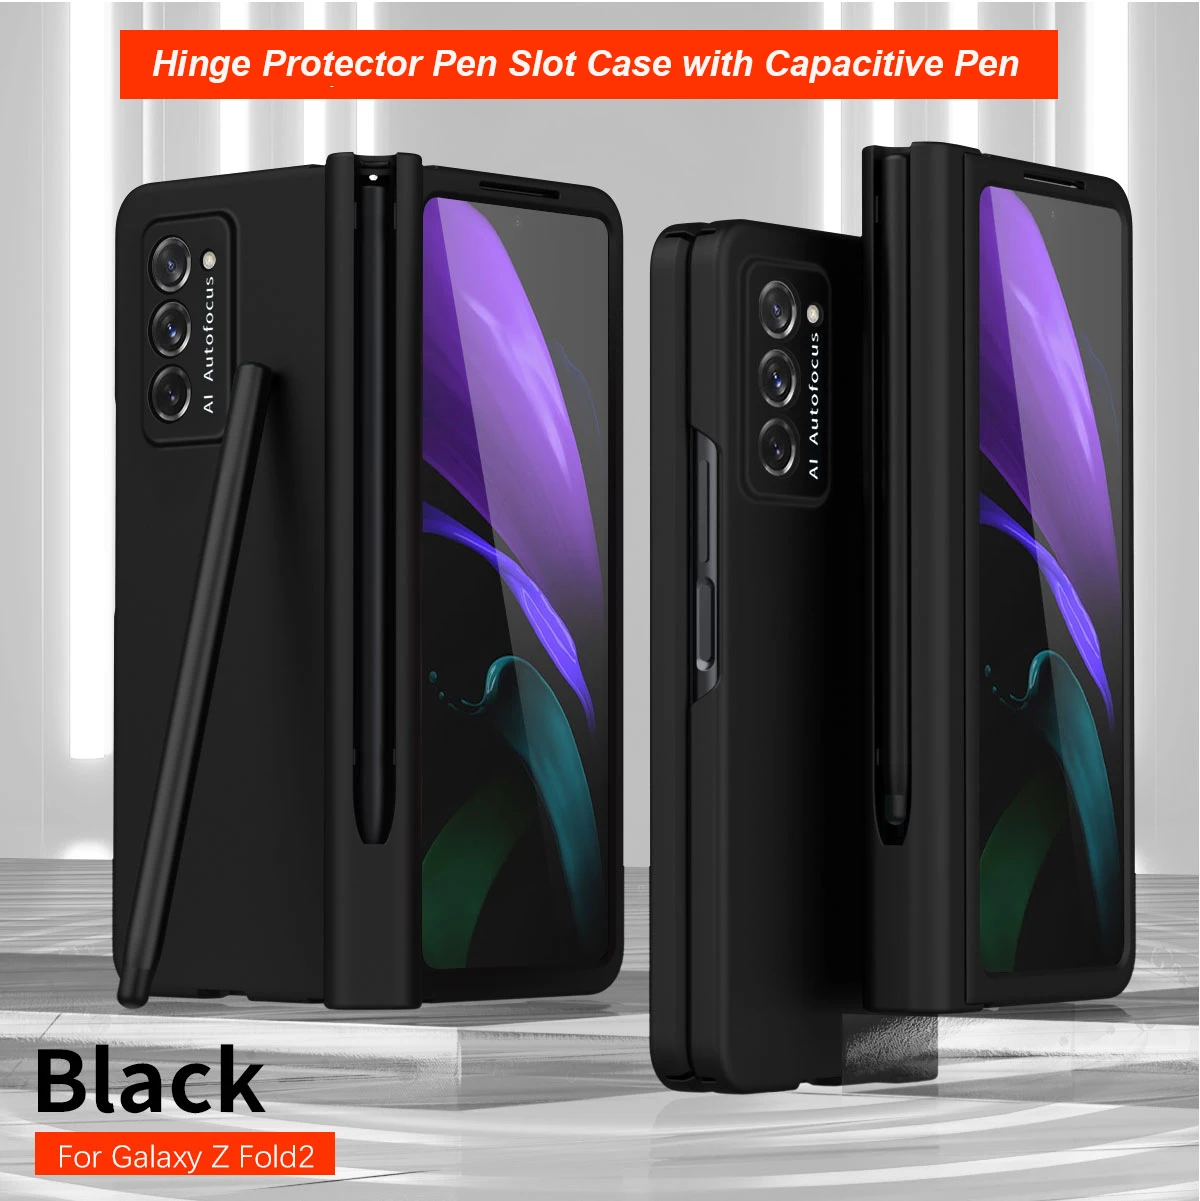 Shockproof Matte Case with Pen for Samsung Galaxy Z Fold 2 5G Case Hinge Protector Hard Plastic Cover for Samsung Z Fold2 Case